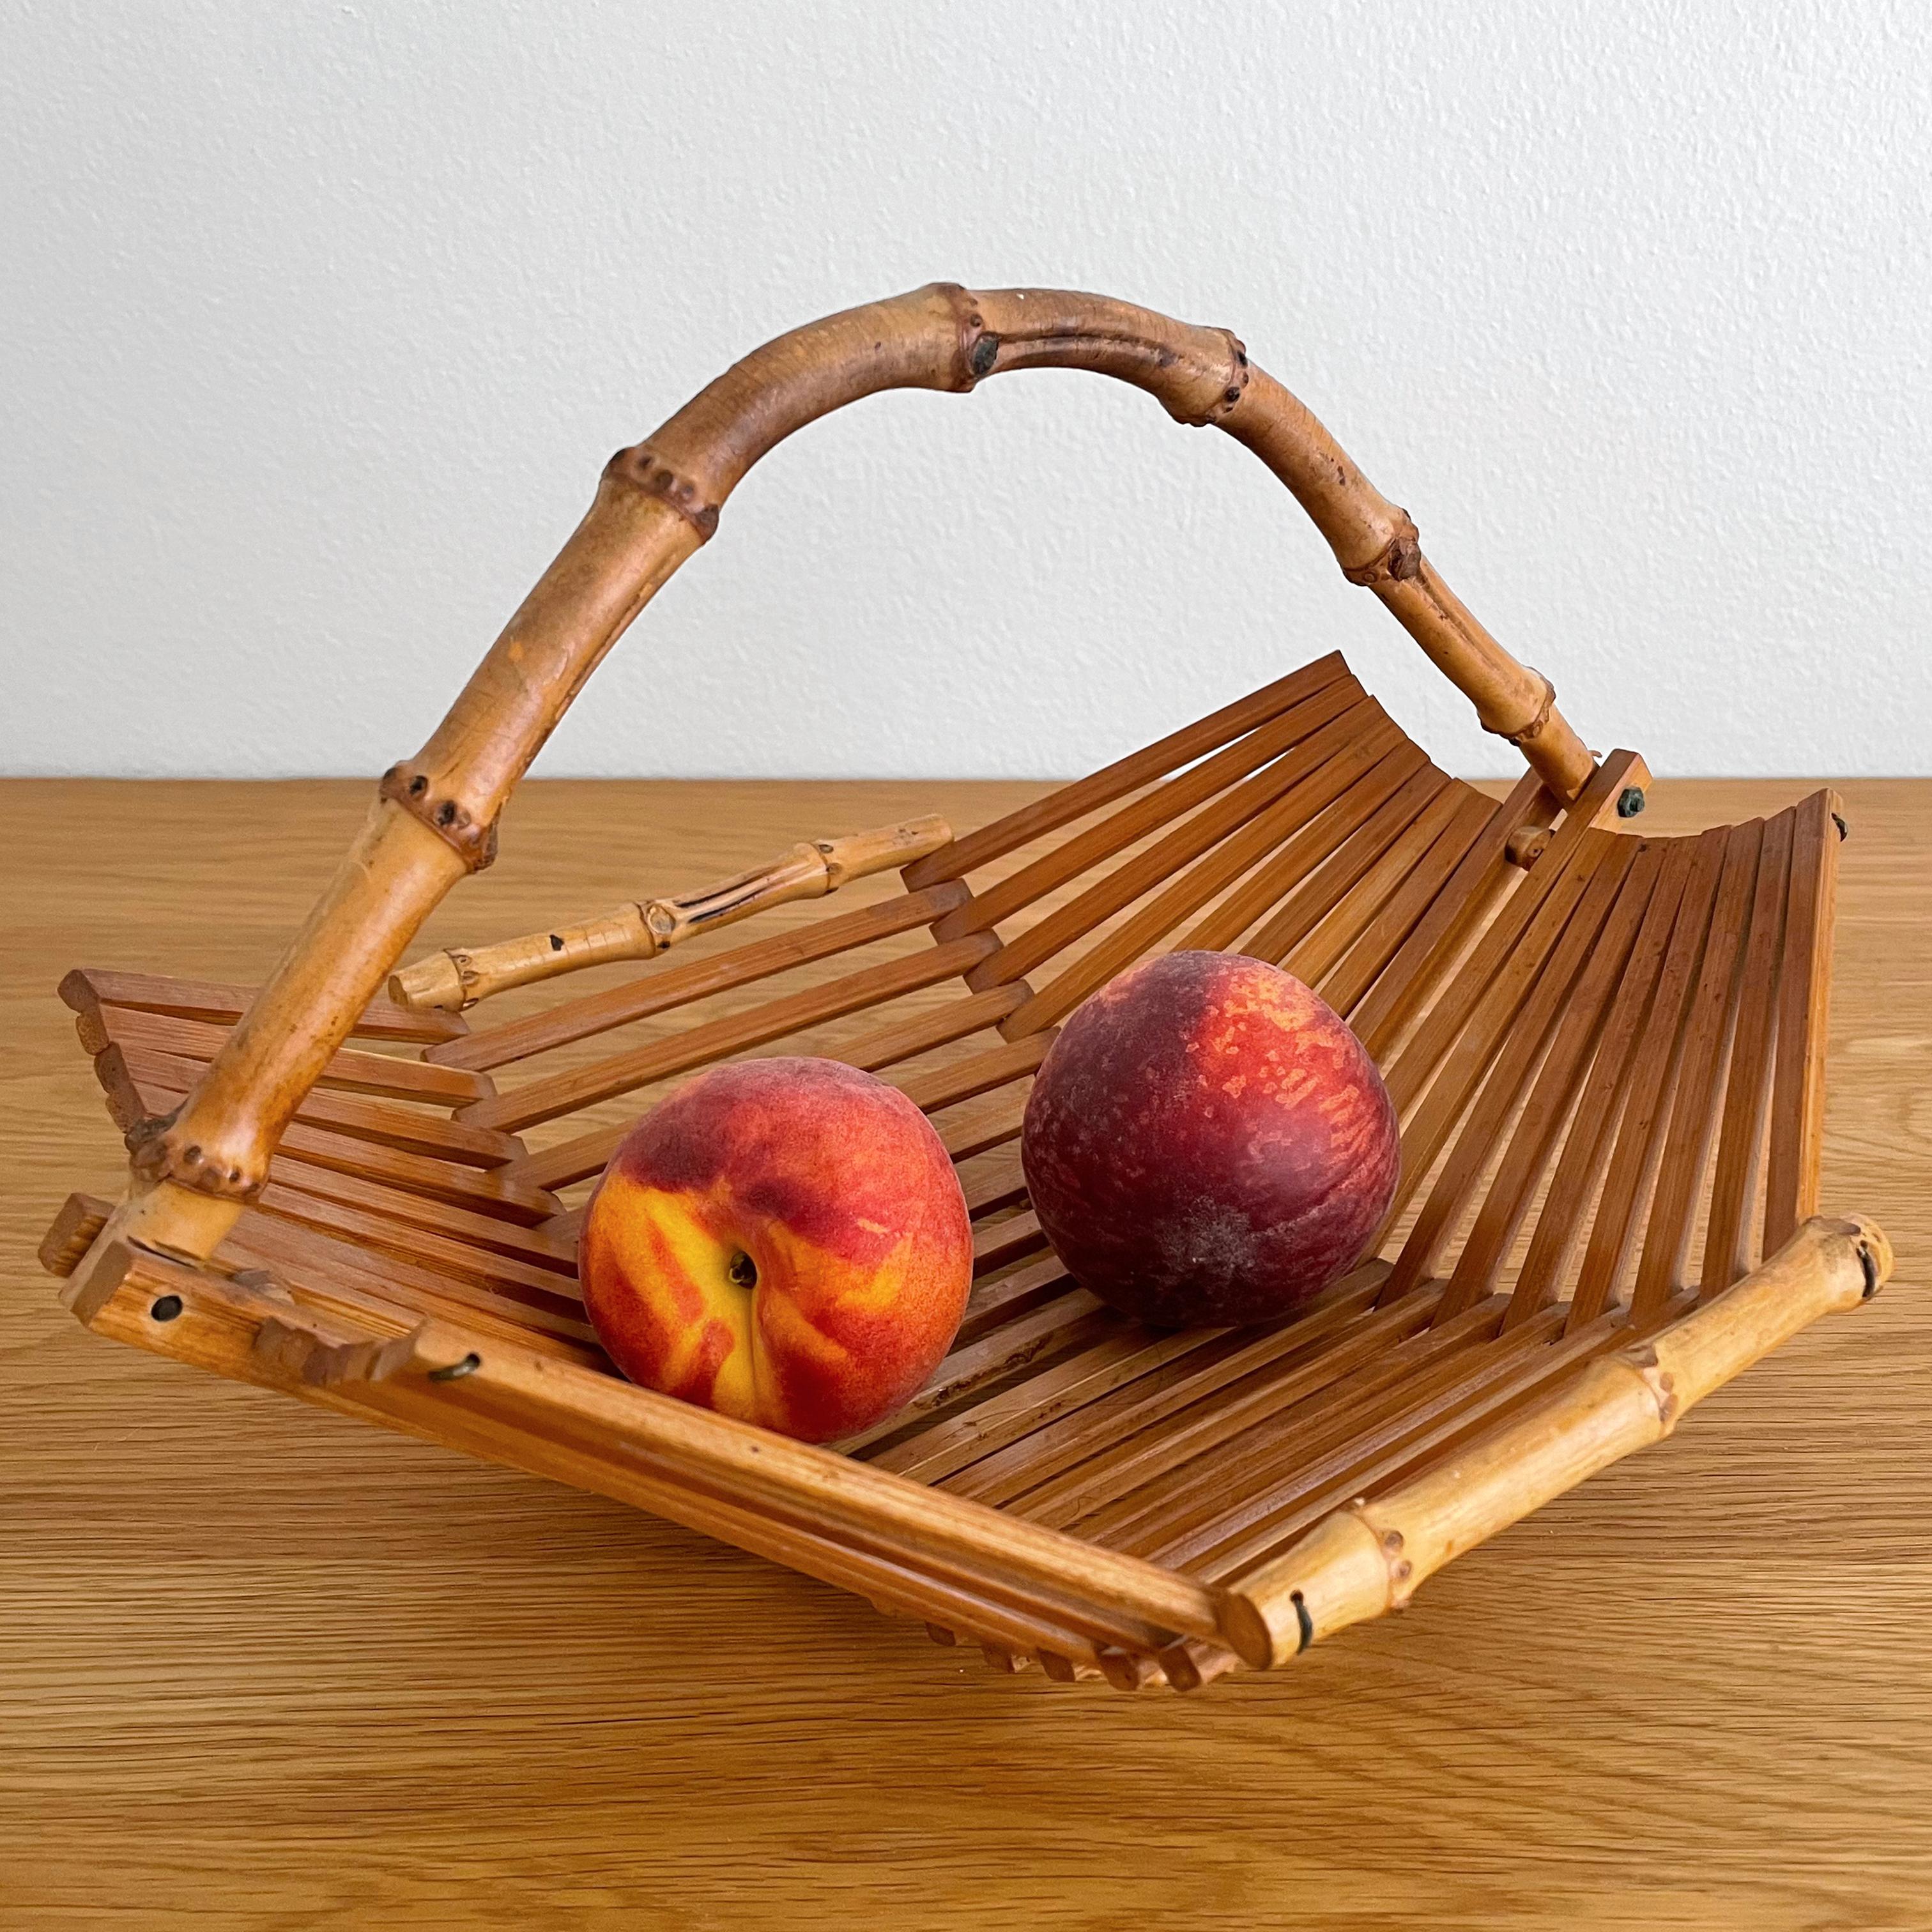 Mid-20th Century French Rattan Fruit Basket with Bamboo Handle For Sale